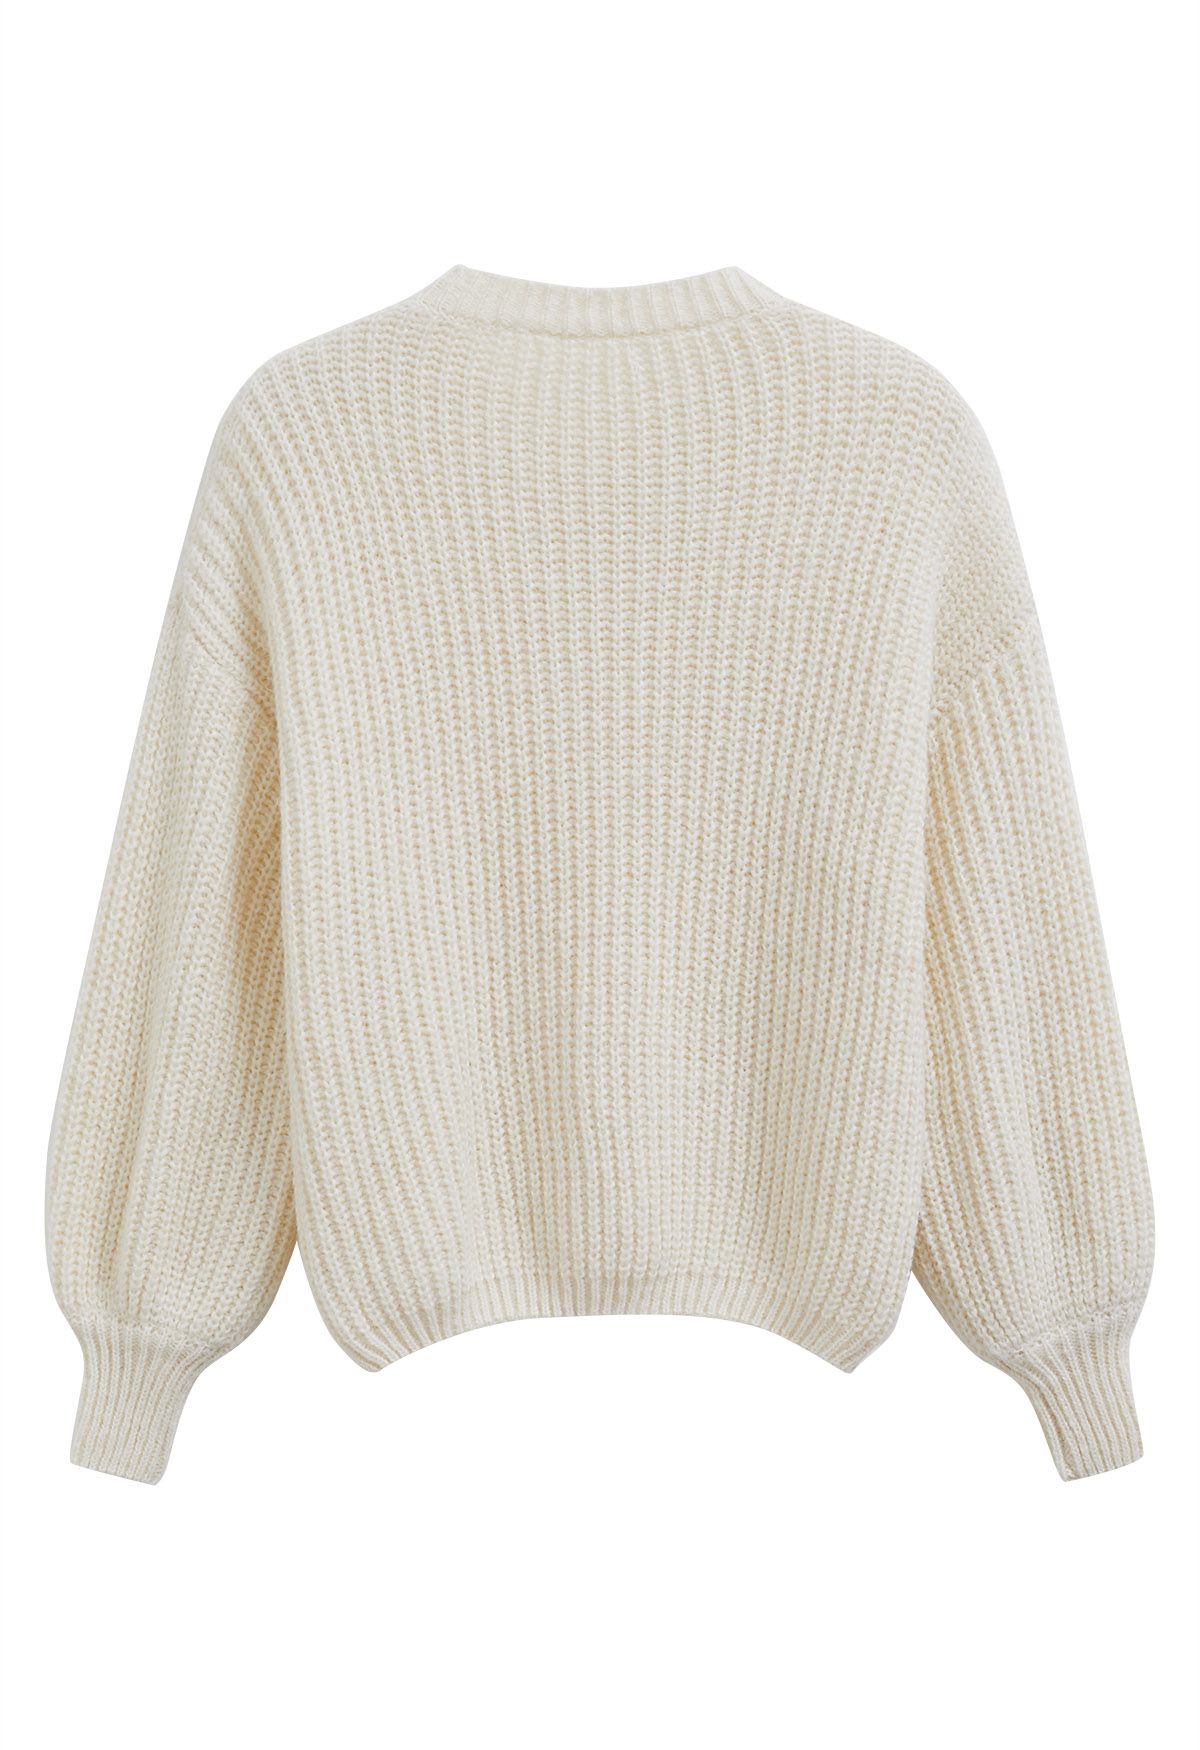 Solid Color Rib Knit Sweater in Ivory - Retro, Indie and Unique 